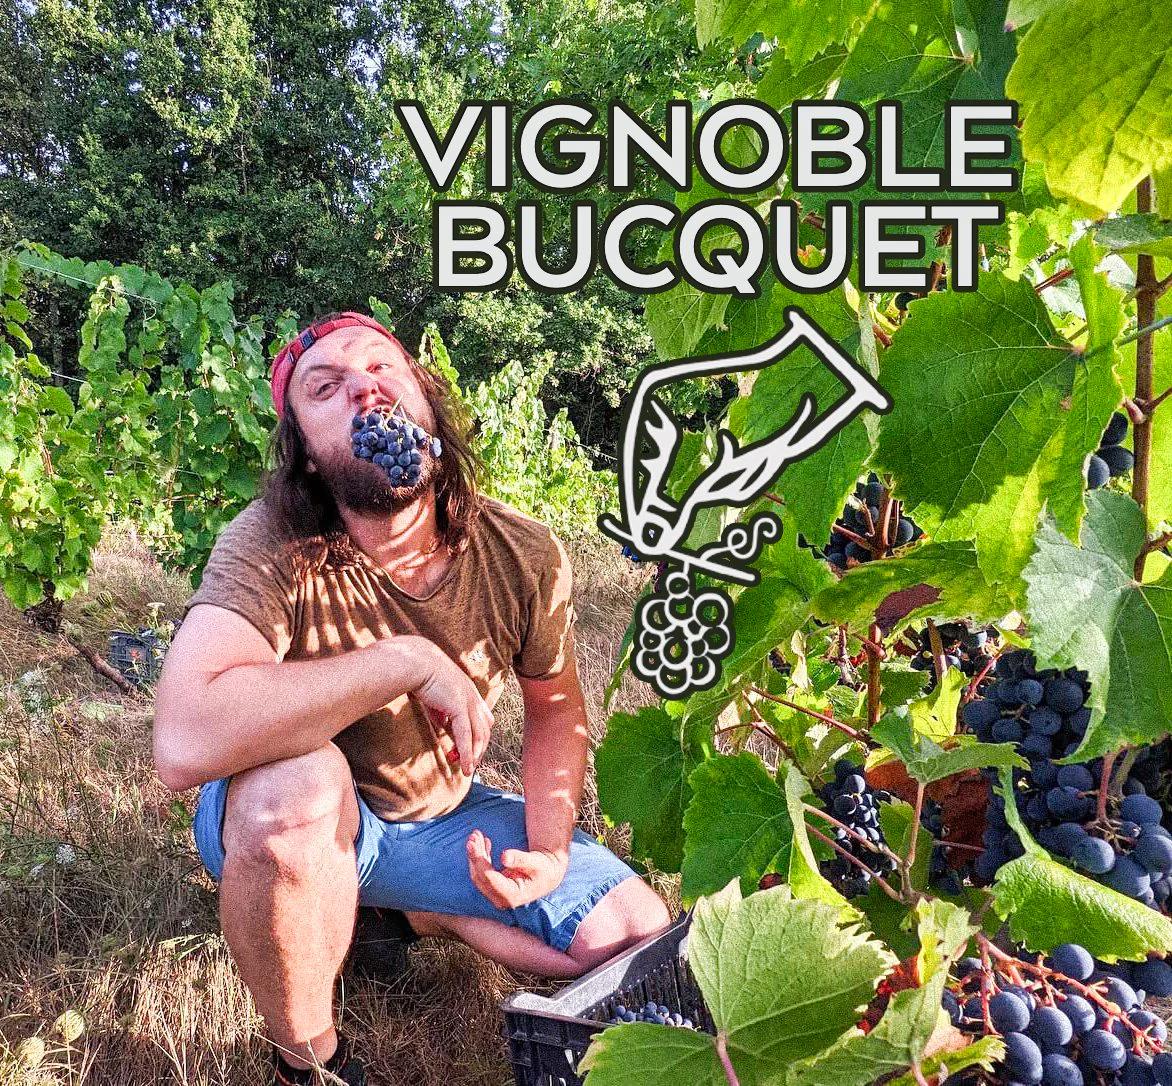 Ludovic Bucquet eating grapes in his vineyard.